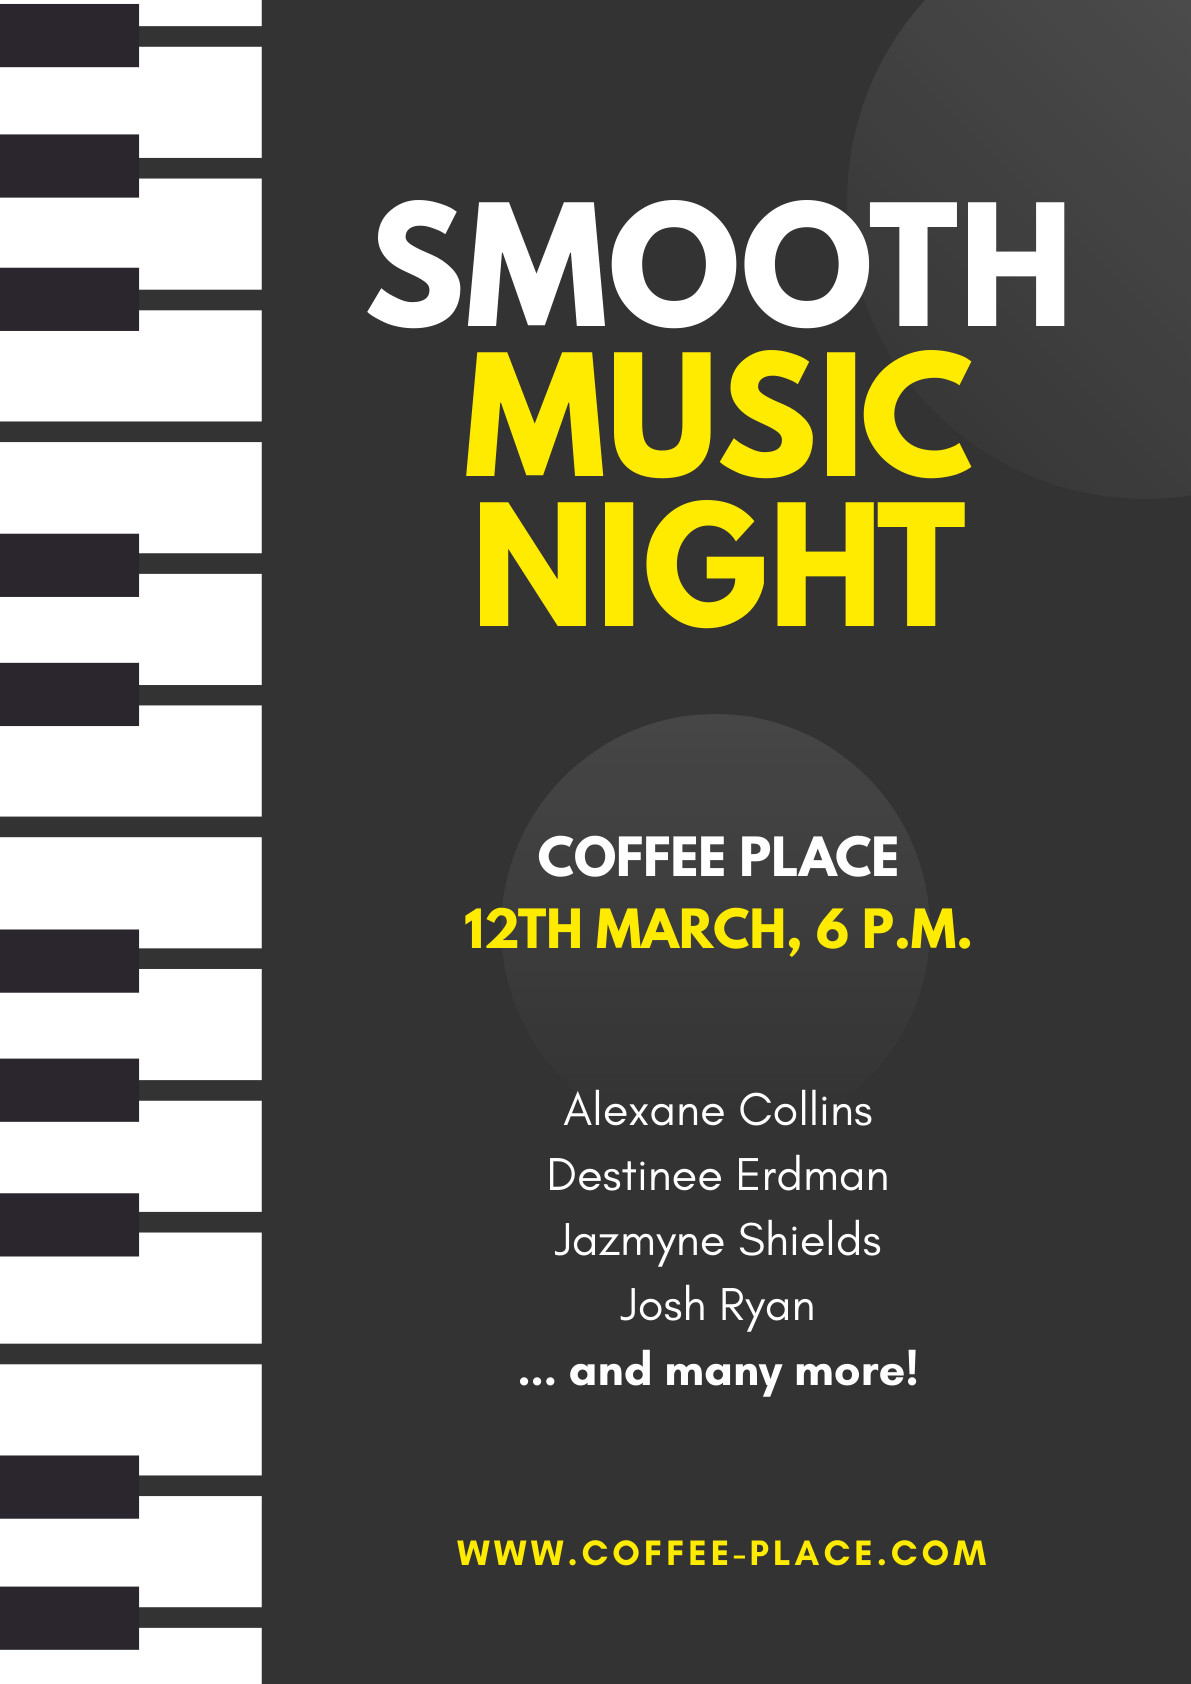 Smooth Music Night – Poster Template